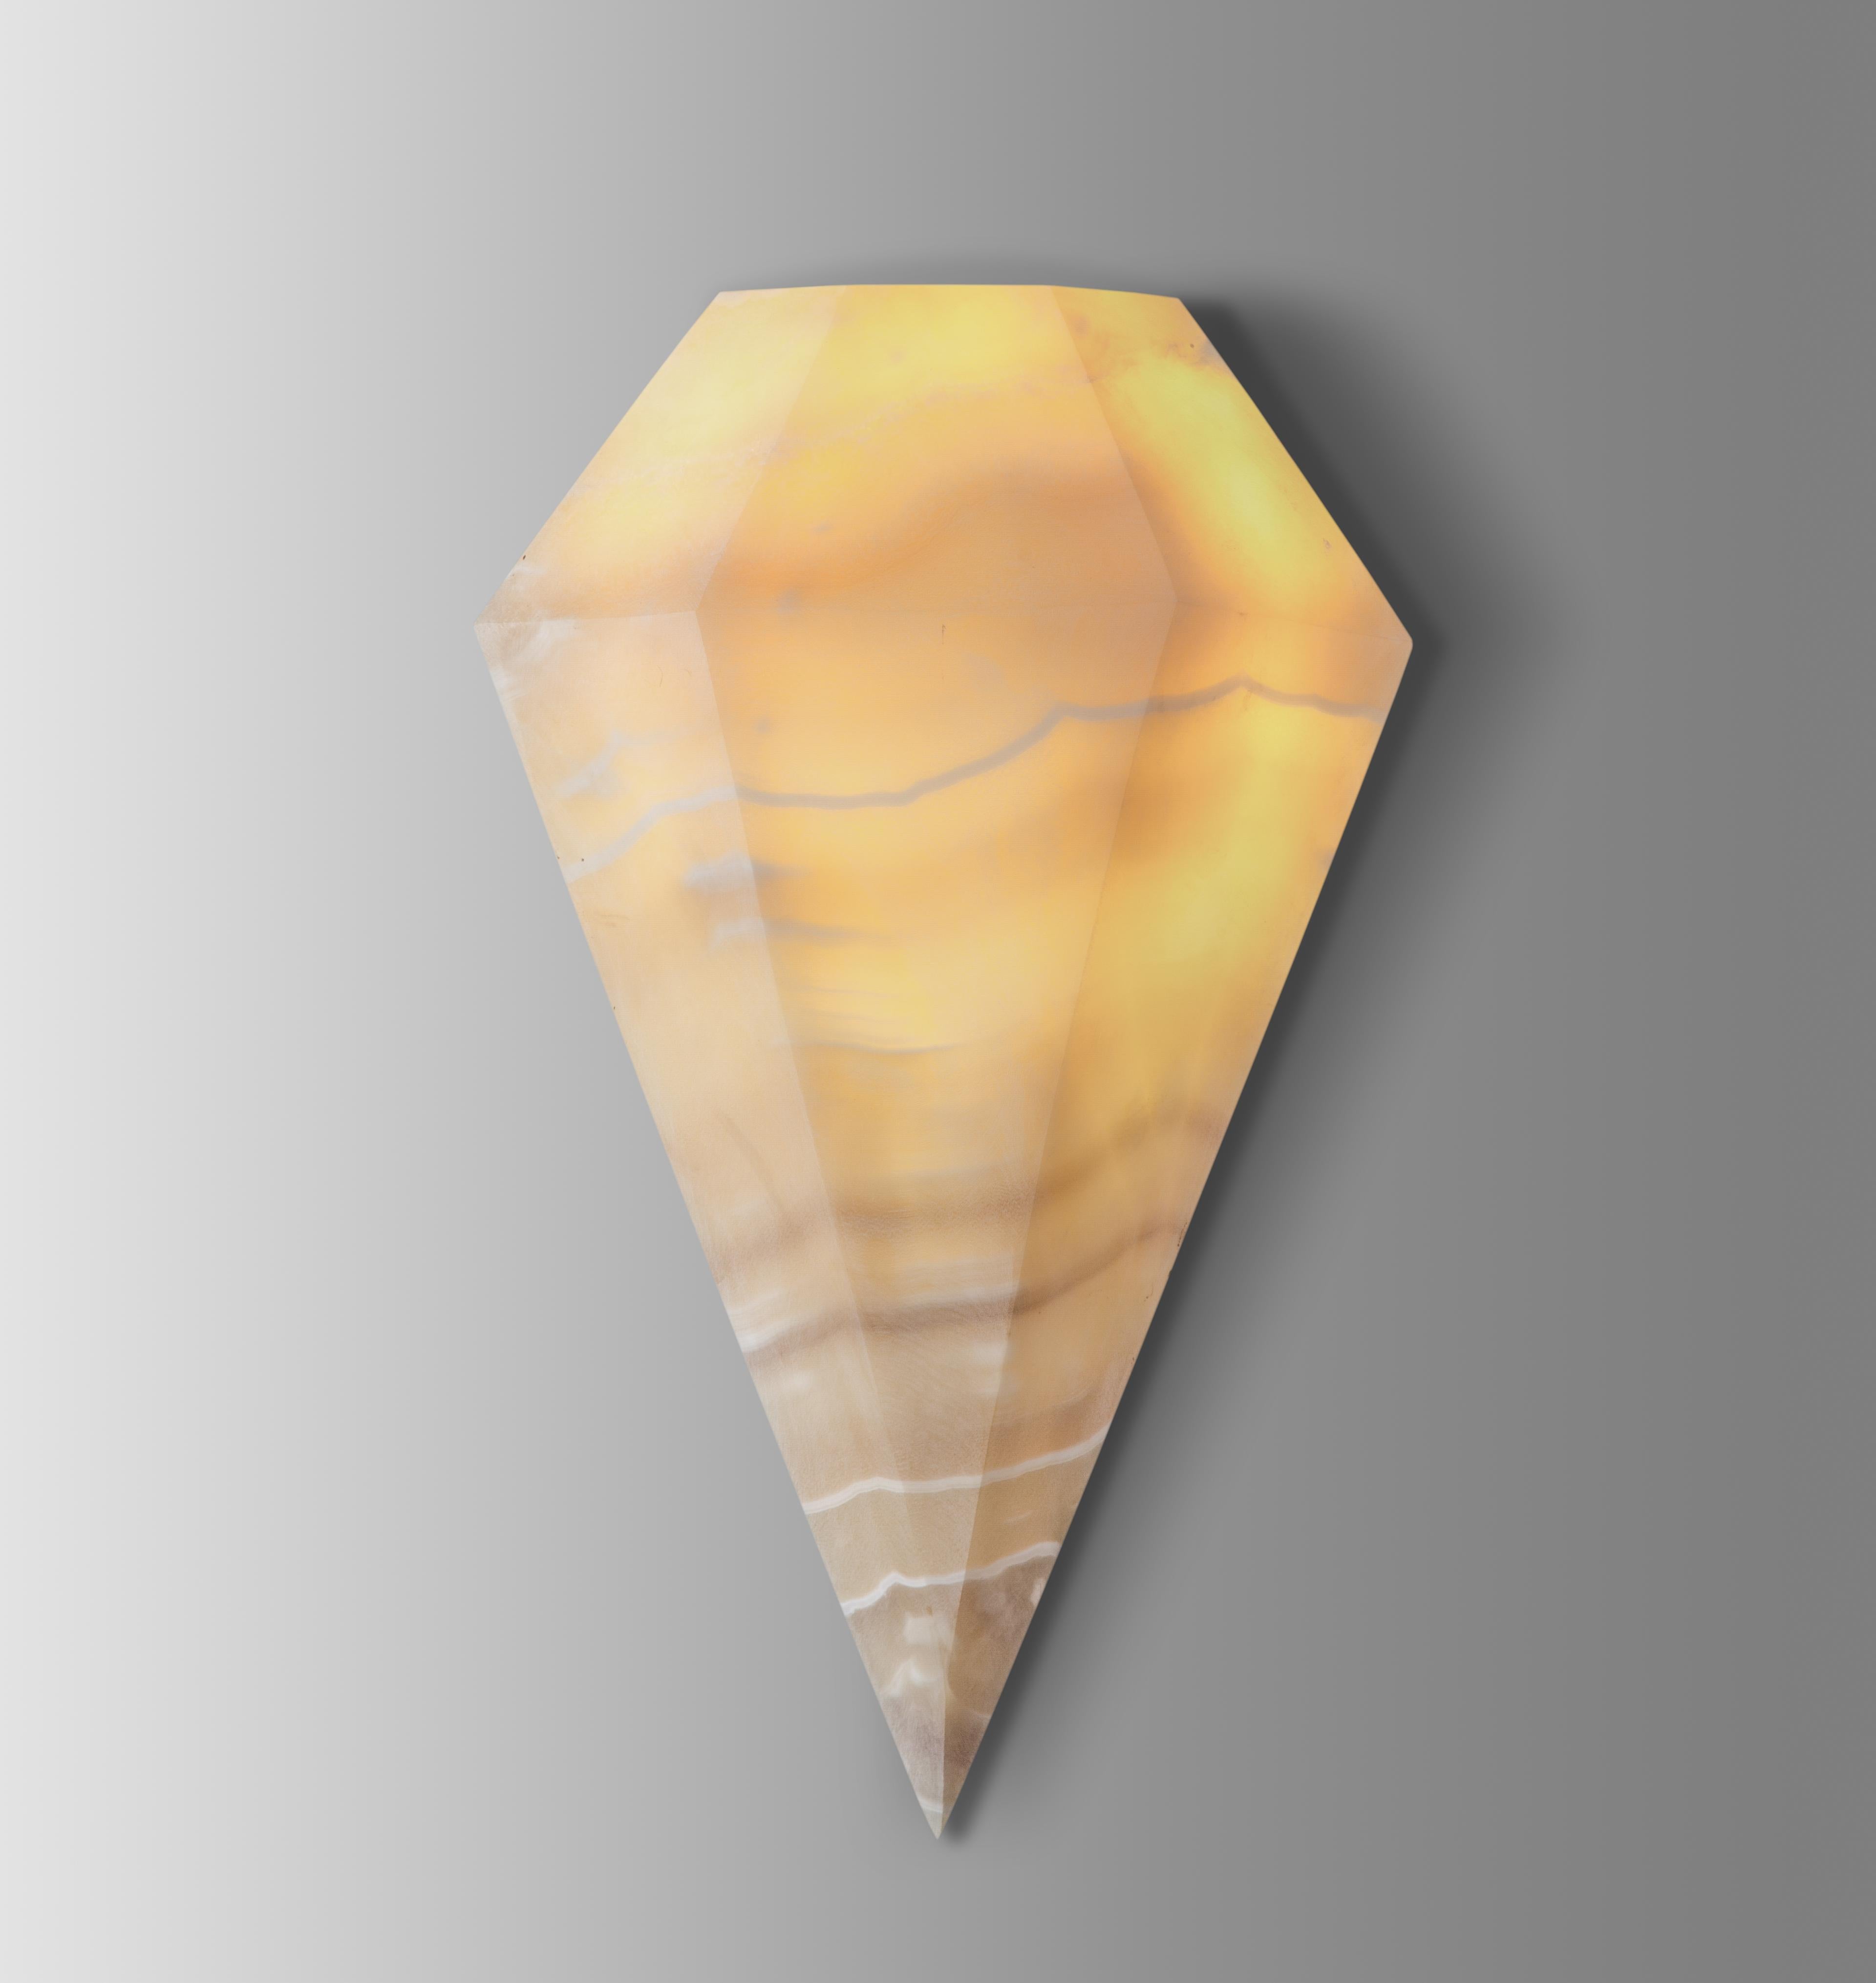 Egyptian Diamond I, Alabaster Sconce Sculpted by Omar Chakil